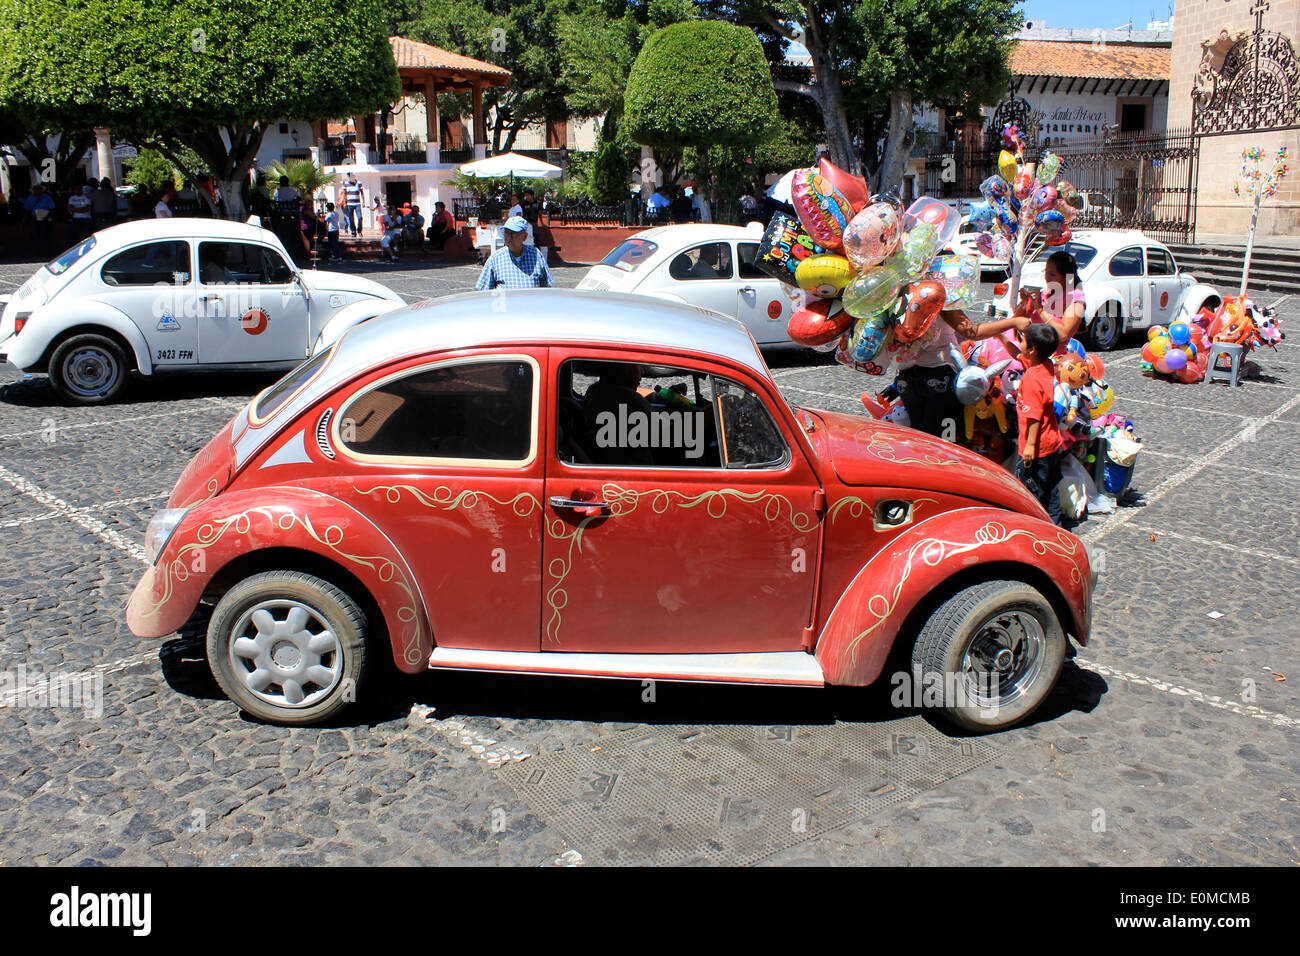 A customized red VW Beetle in the Plaza Borda of Taxco, Guerrero, Mexico Stock Photo